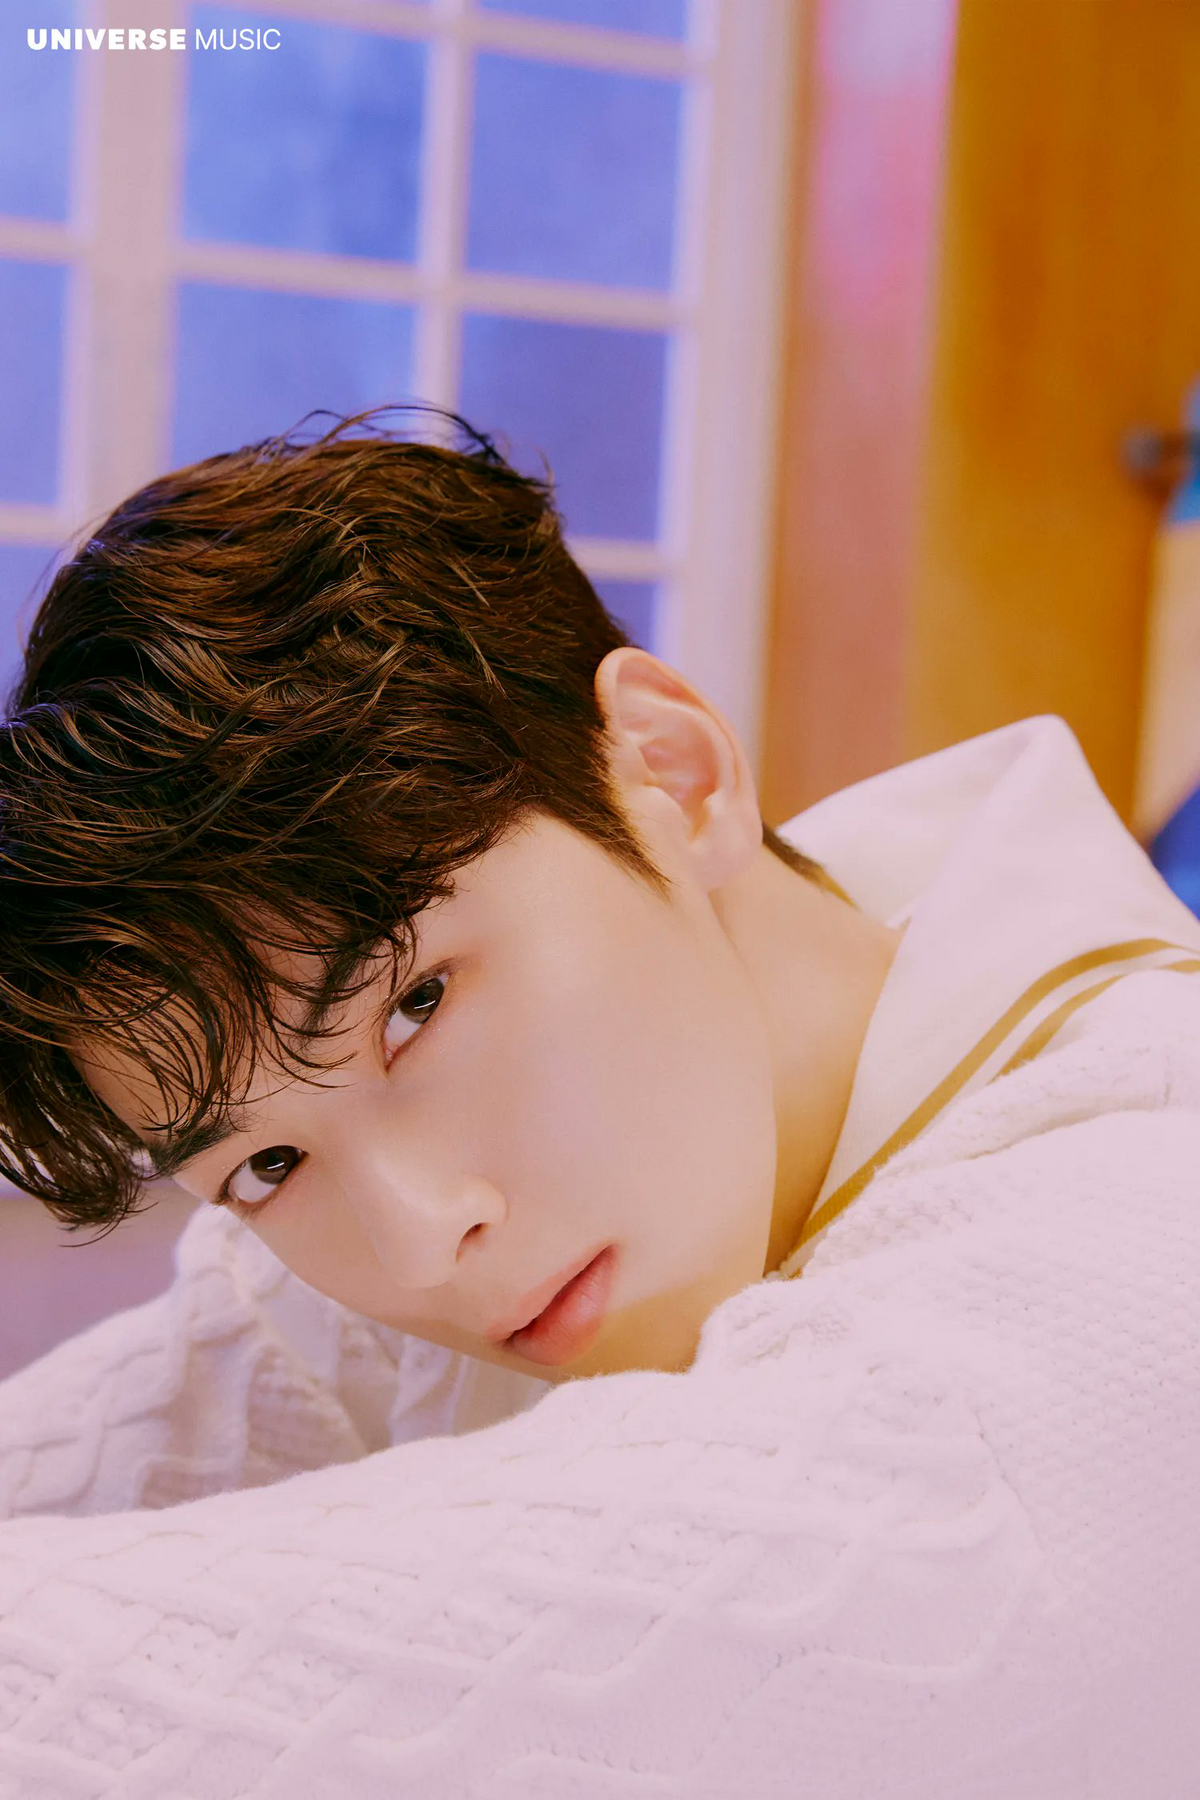 The Seoul Story on X: ASTRO Cha Eun Woo welcomes Summer with a